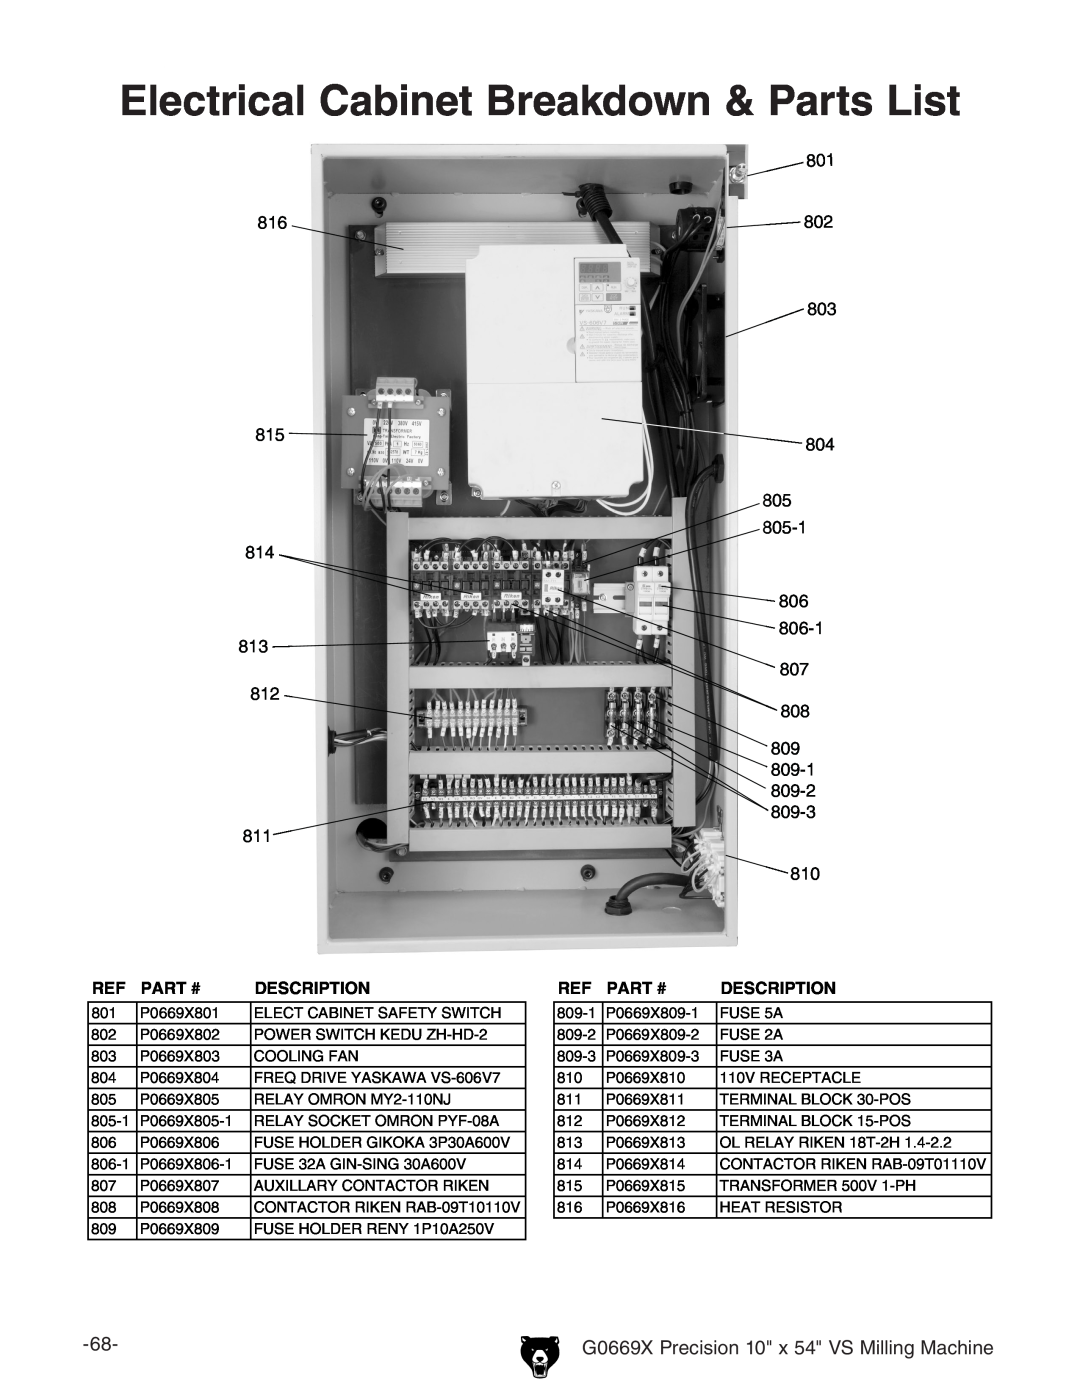 Grizzly g0669X owner manual Electrical Cabinet Breakdown & Parts List, + -%+, %. -%, CONTACTOR RIKEN RAB-09T10110V 